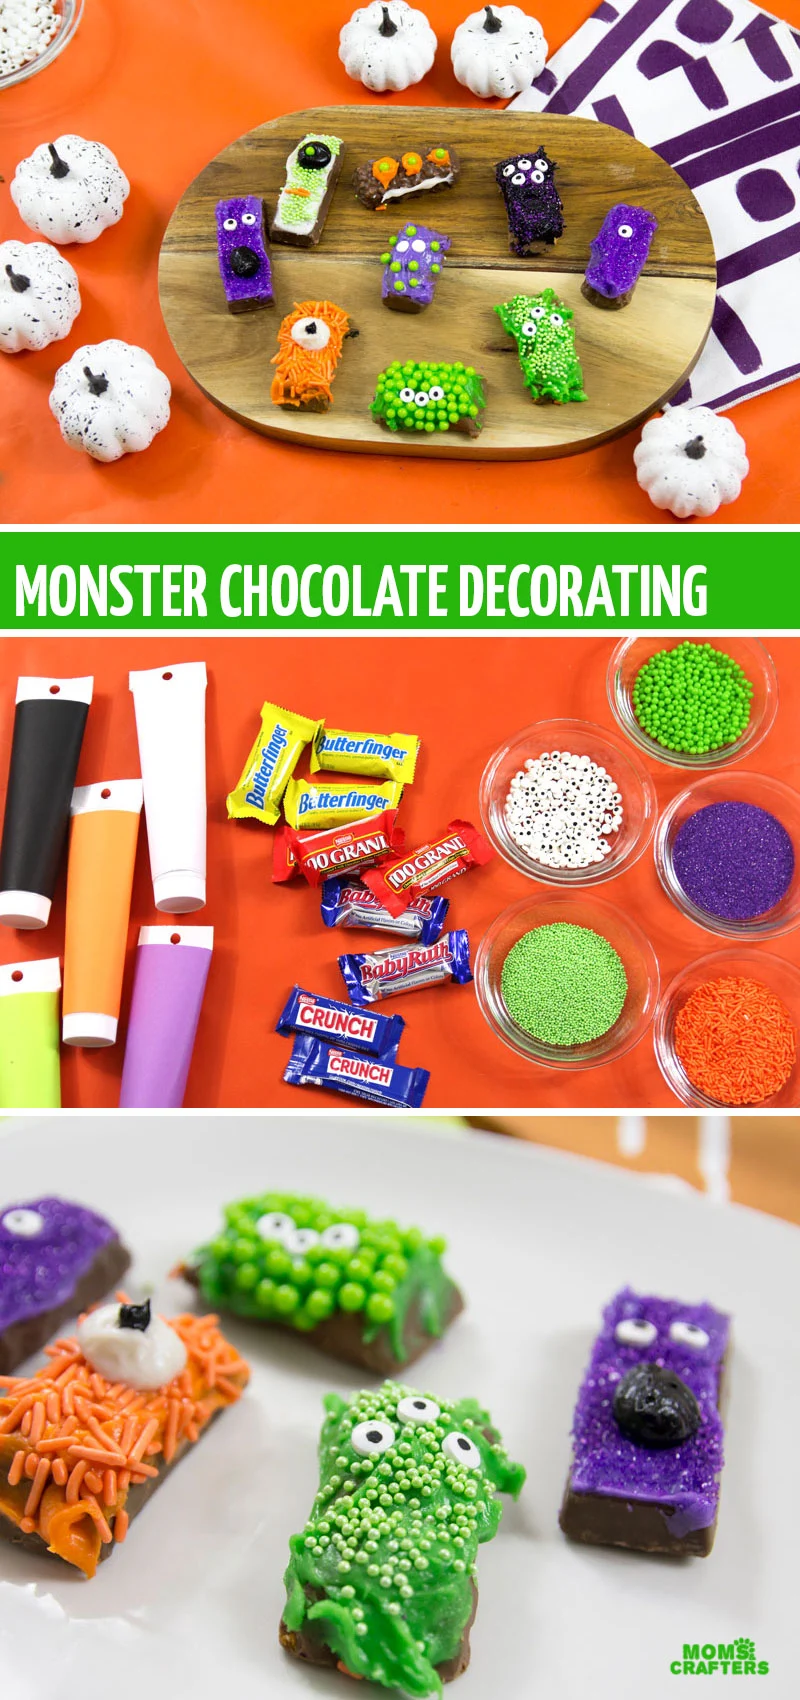 If you're looking for Halloween or Monster food ideas, this monster candy bar decorating idea is perfect for kids and adults to make! It's super easy and can be made in advance, and uses some favorite chocolate bars!